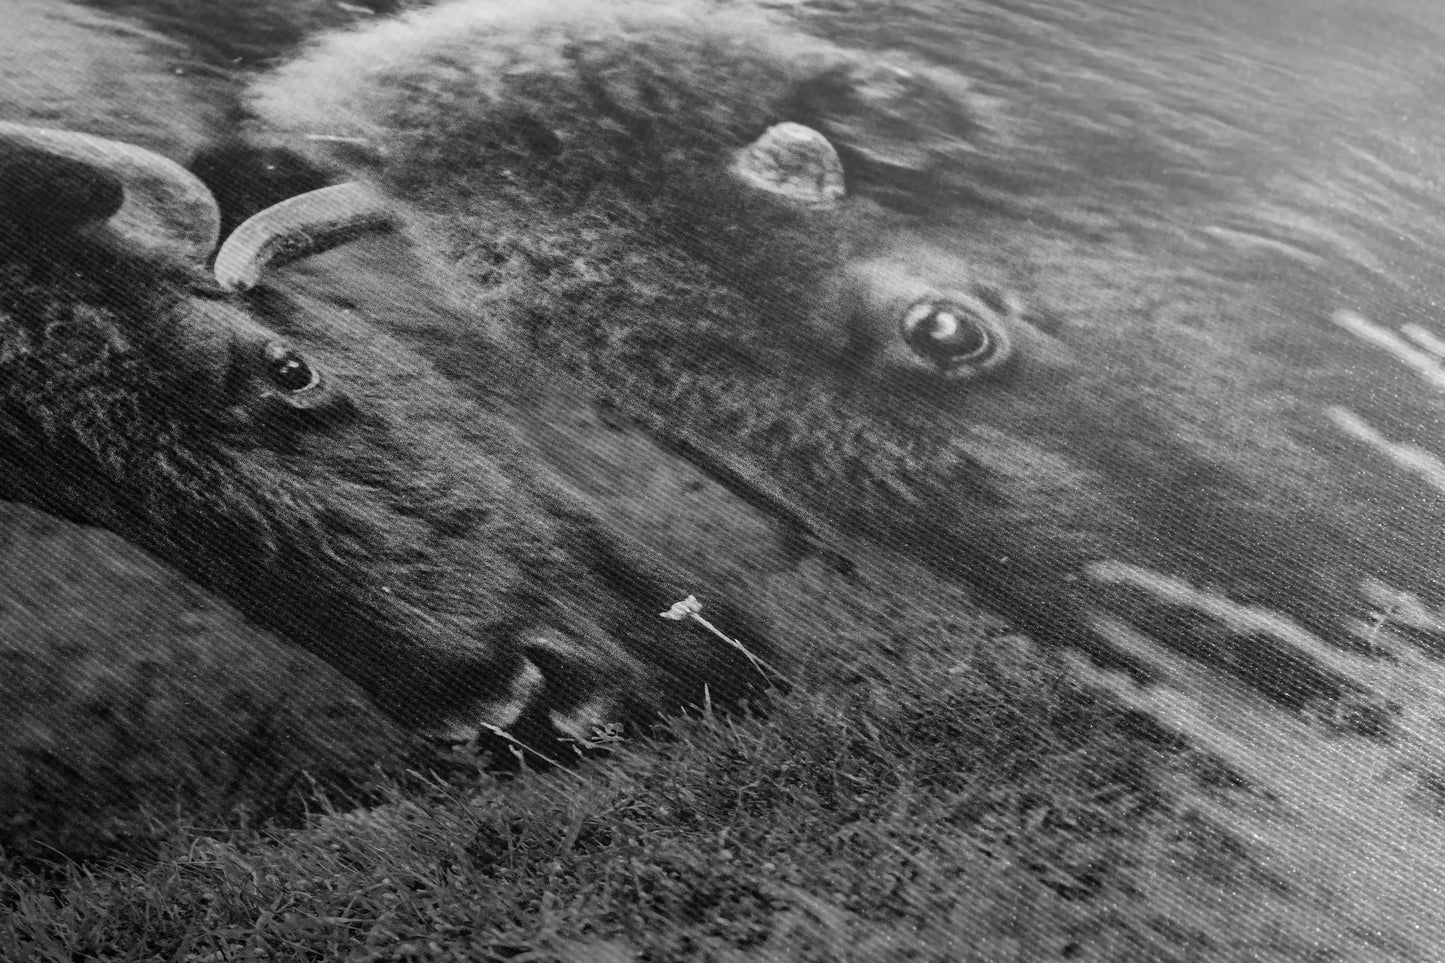 Canvas texture close-up of a powerful black and white image depicting the dynamic encounter of two dueling bison.